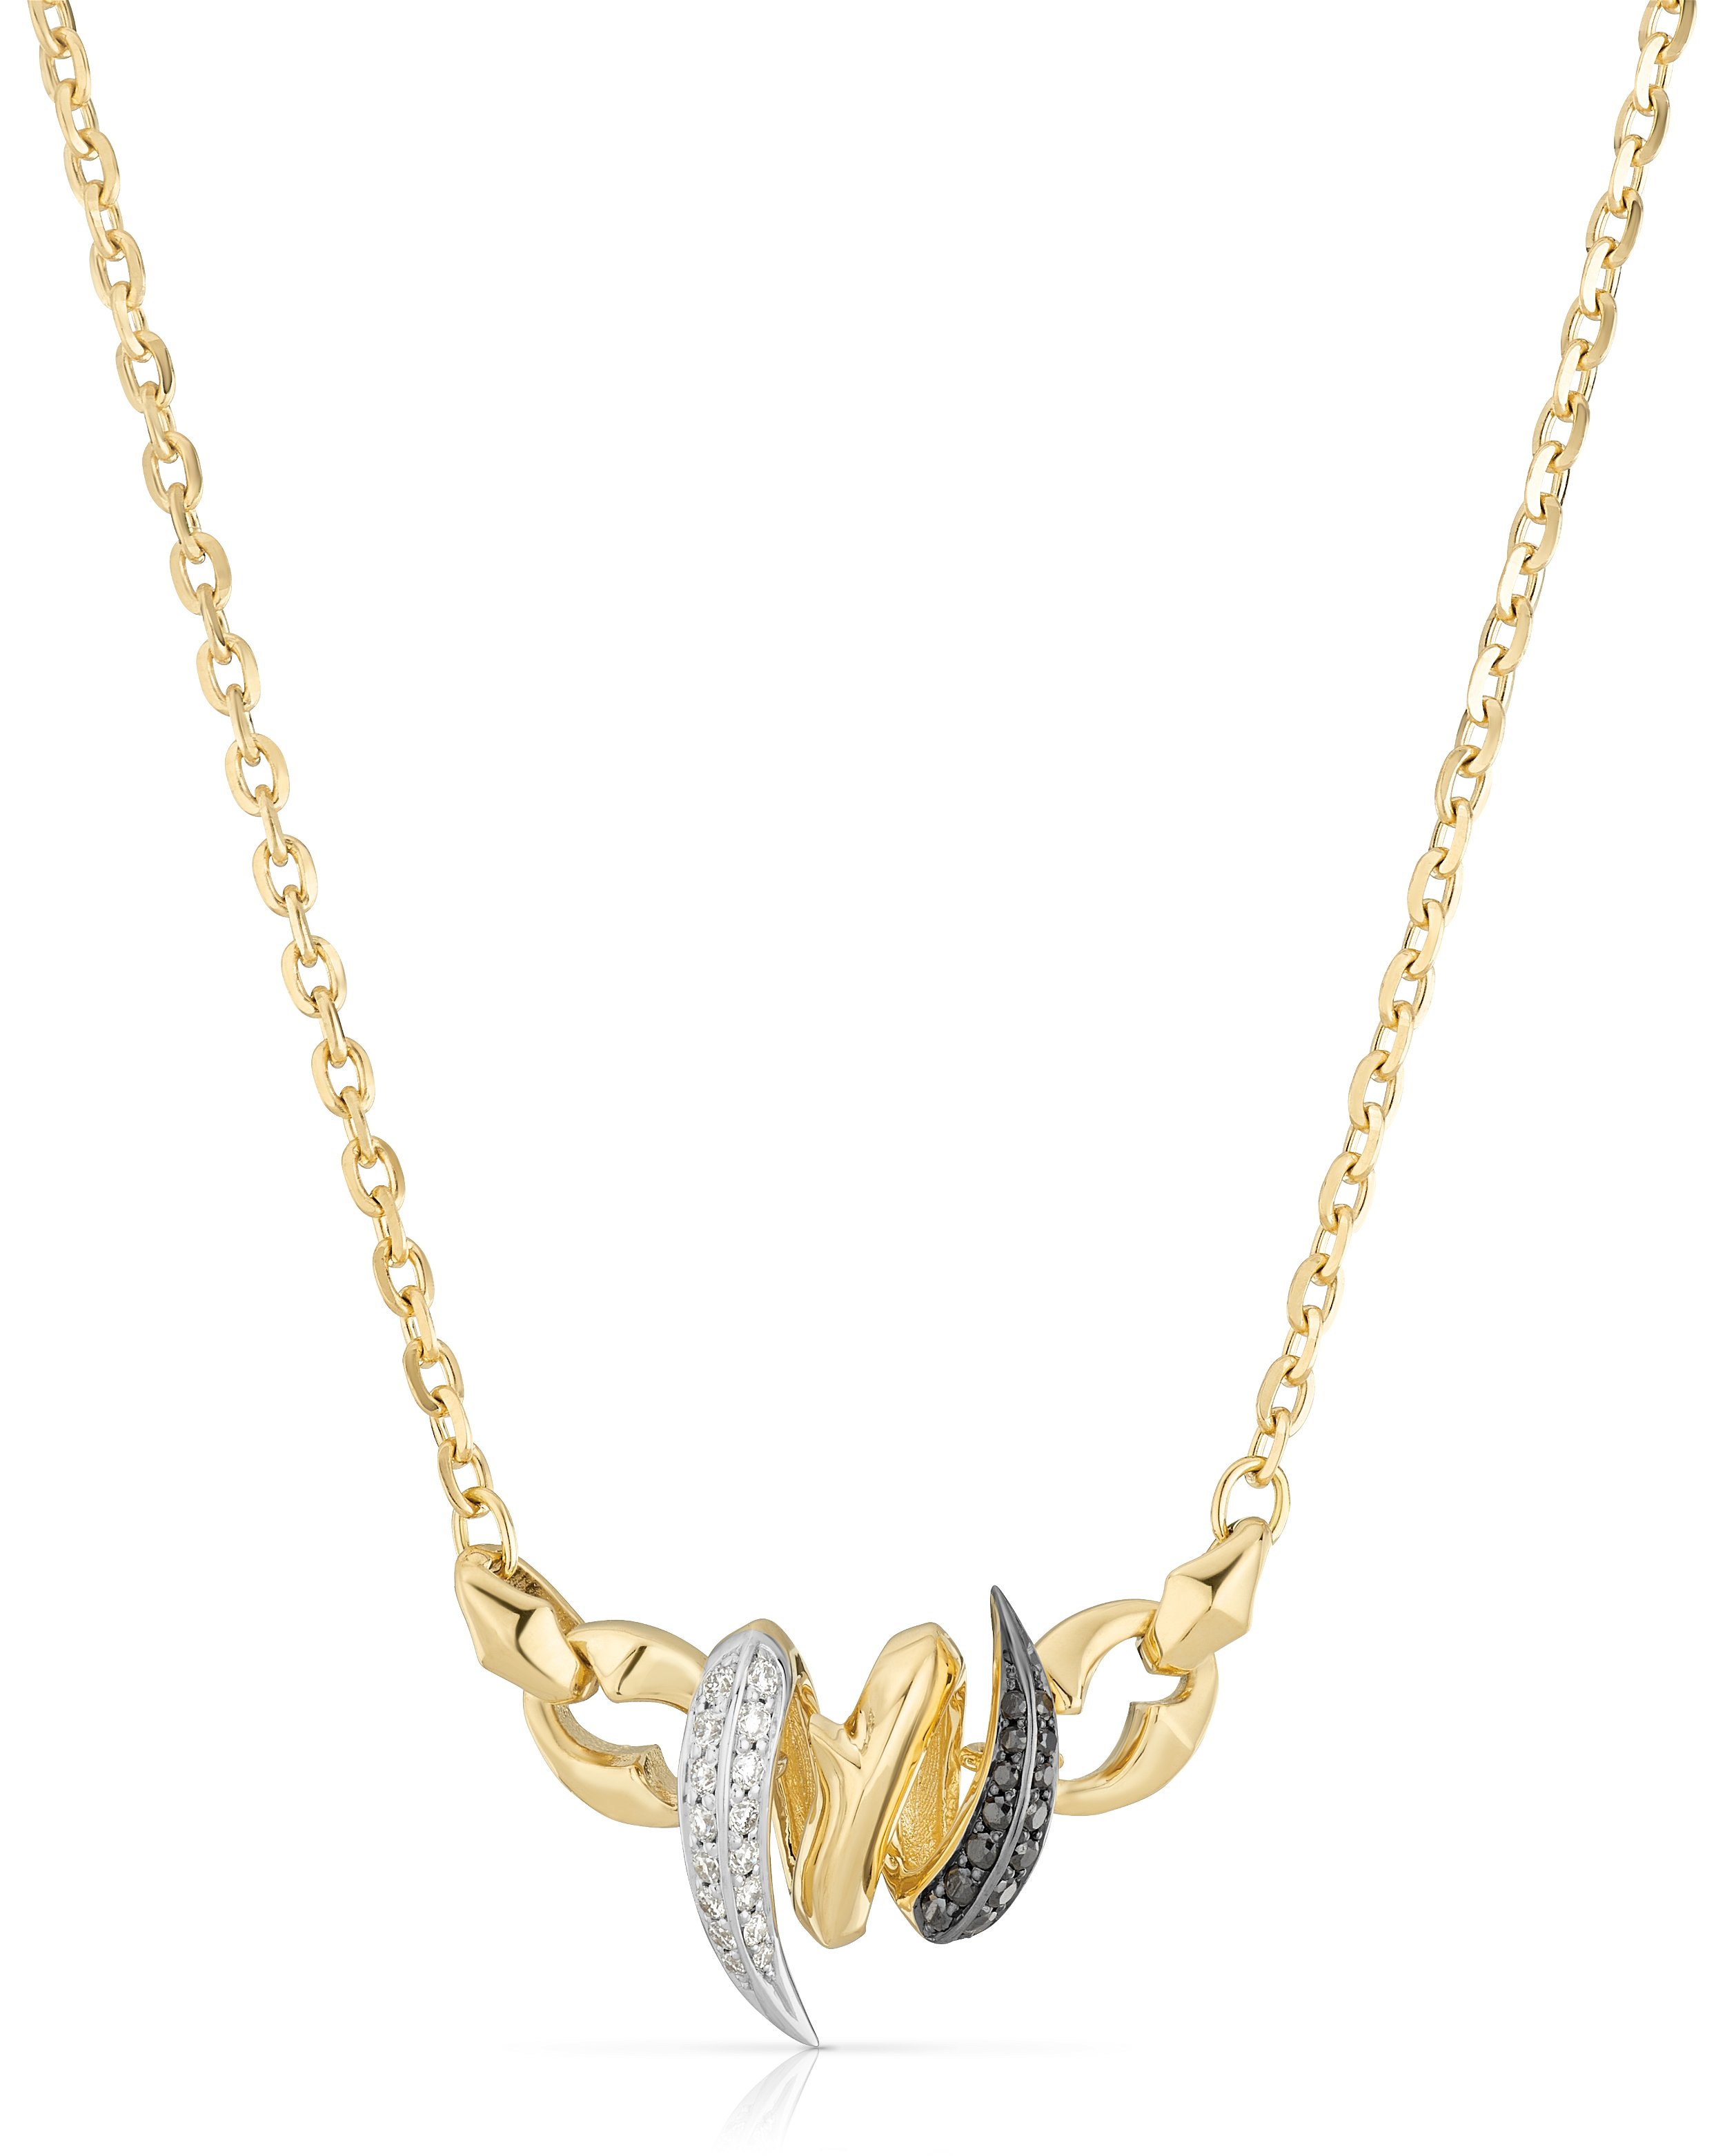 Thorn Embrace Entwined Inline Pendant Necklace with Black and White Diamonds in 18kt White and Yellow Gold